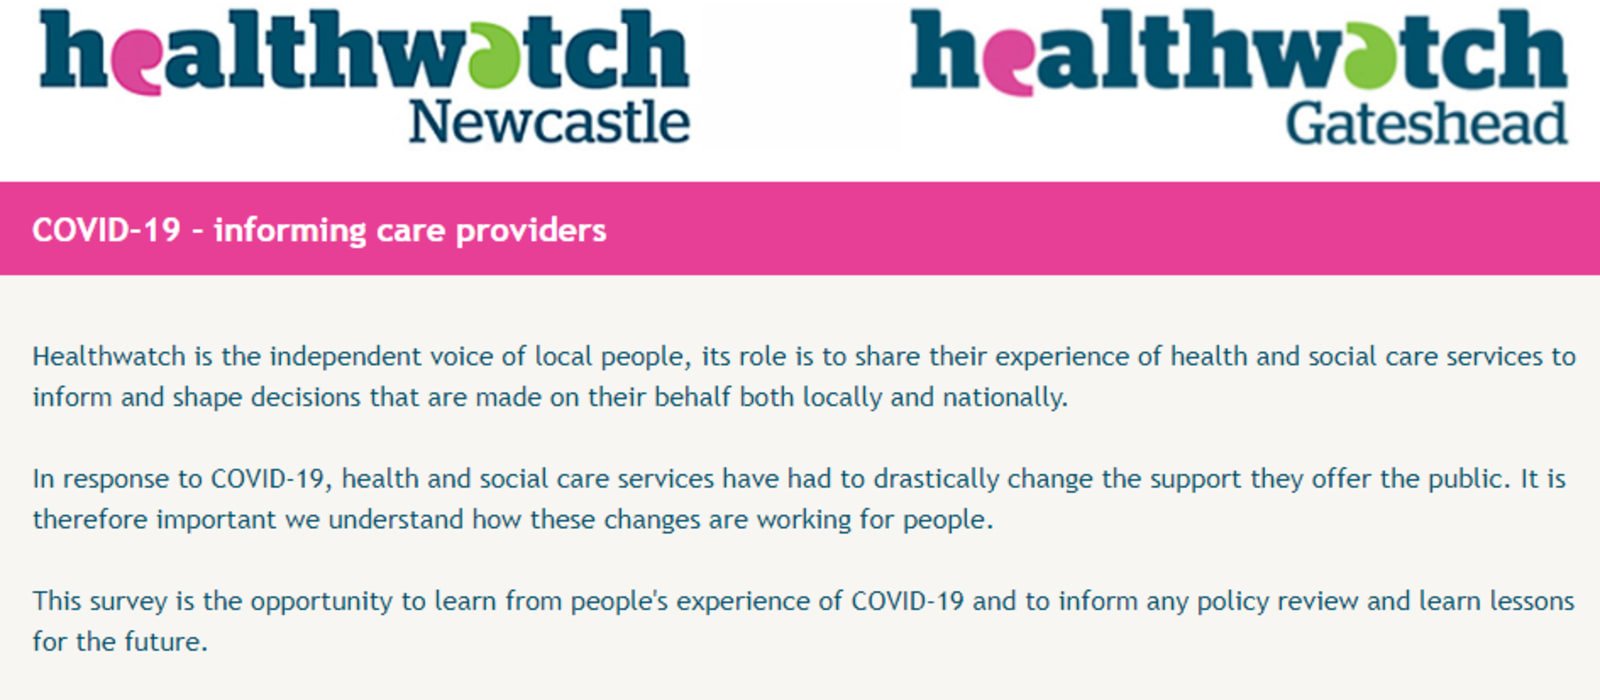 Healthwatch Survey seeks your experiences during Covid-19